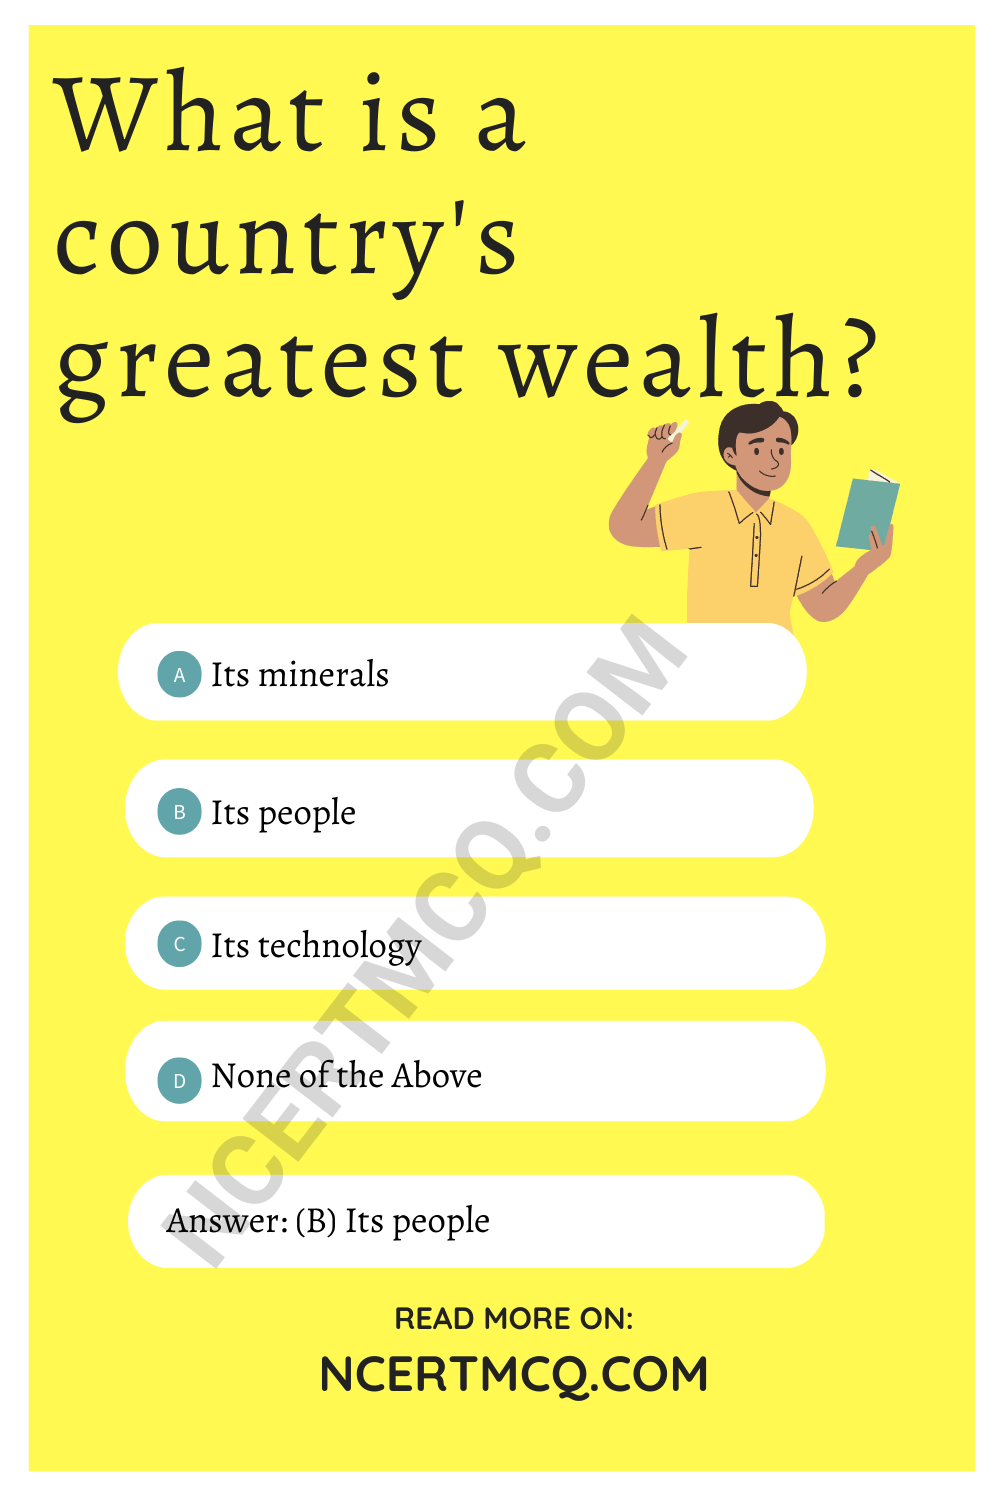 What is a country's greatest wealth?